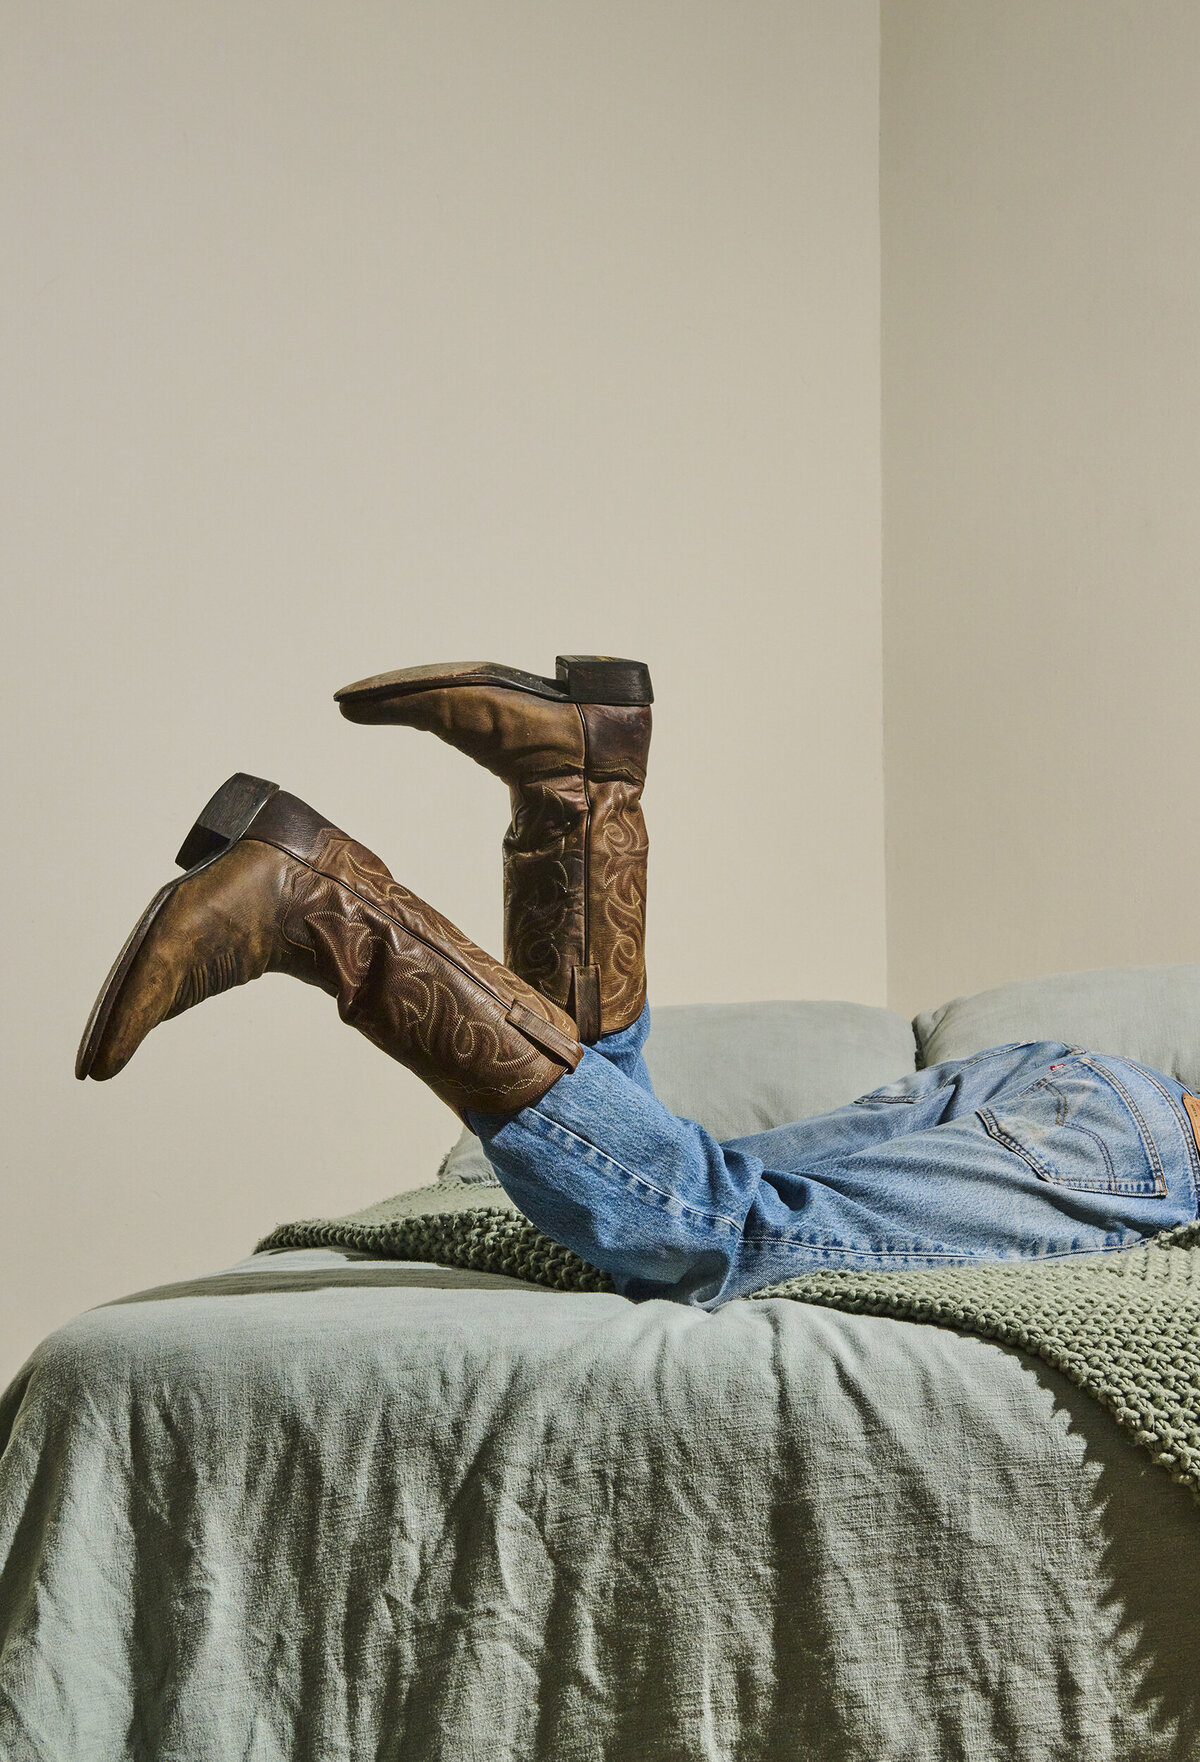 los-angeles-product-photographer-footwear-photography-lindsay-kreighbaum-cowboy-boots